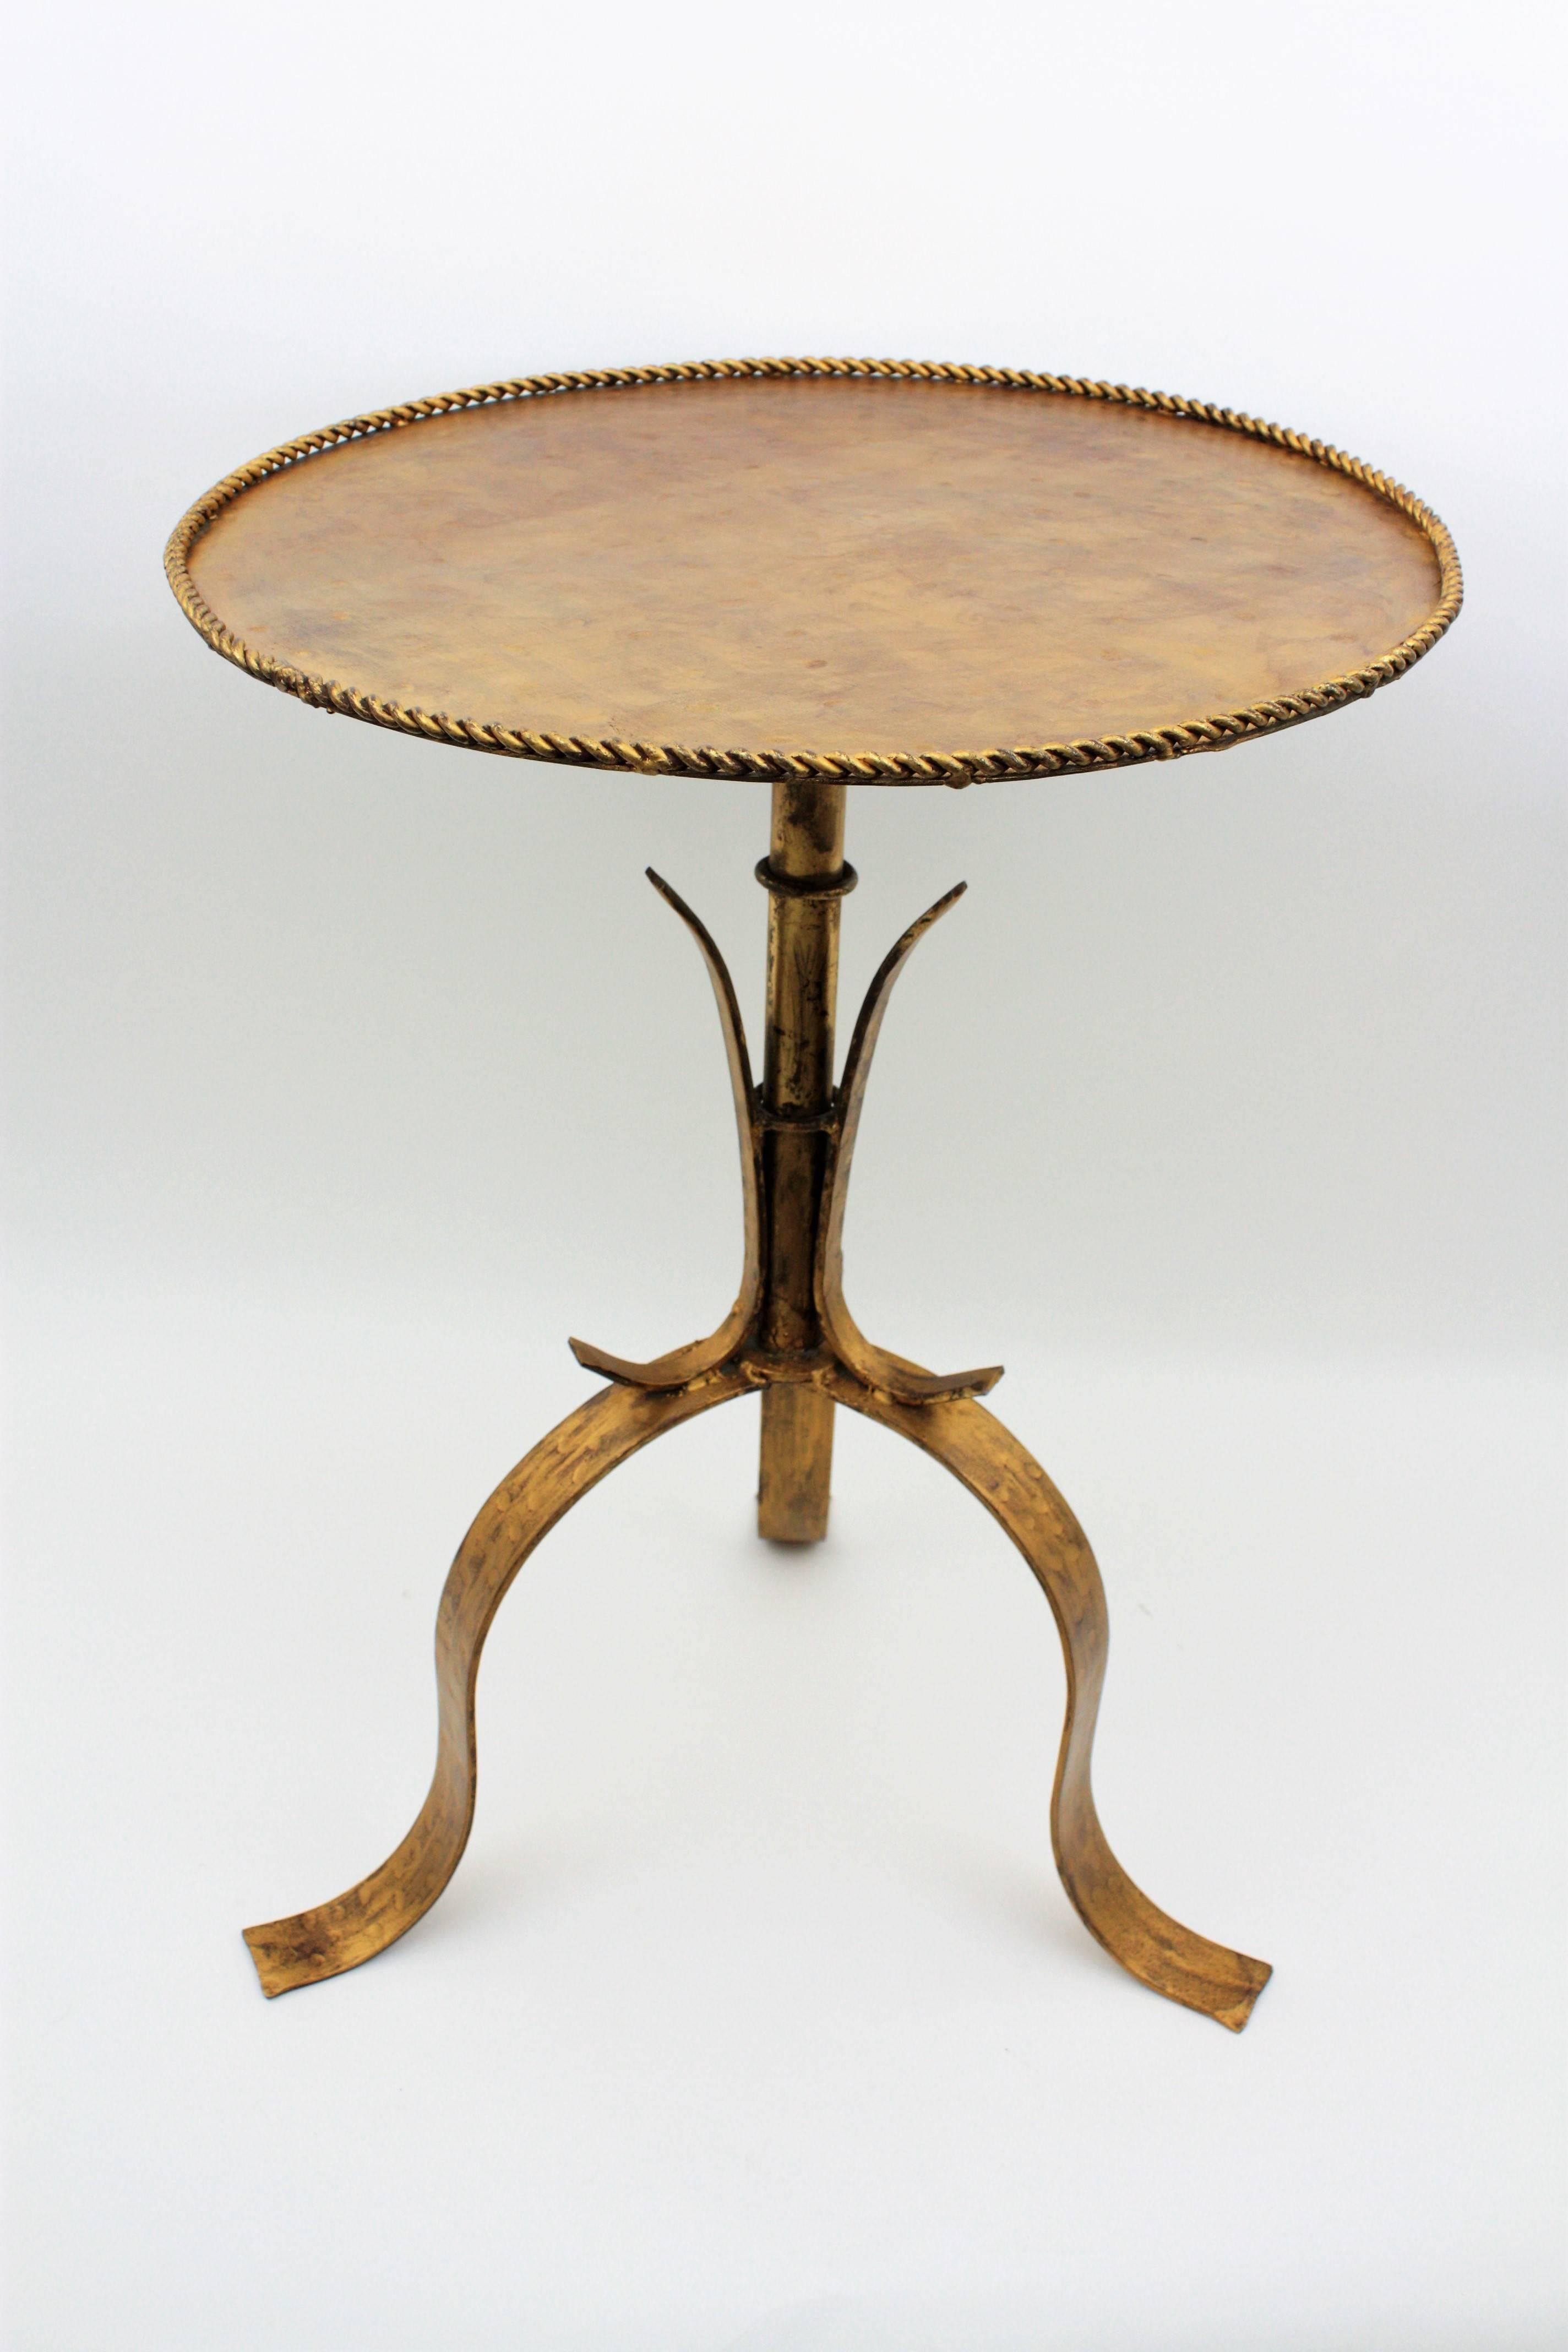 Beautiful hand-hammered gilt iron gueridon. Very decorative as a side table, coffee table or stand.
Spain, 1940s-1950s.

Please, kindly check our storefront to see more pieces in this manner.
        